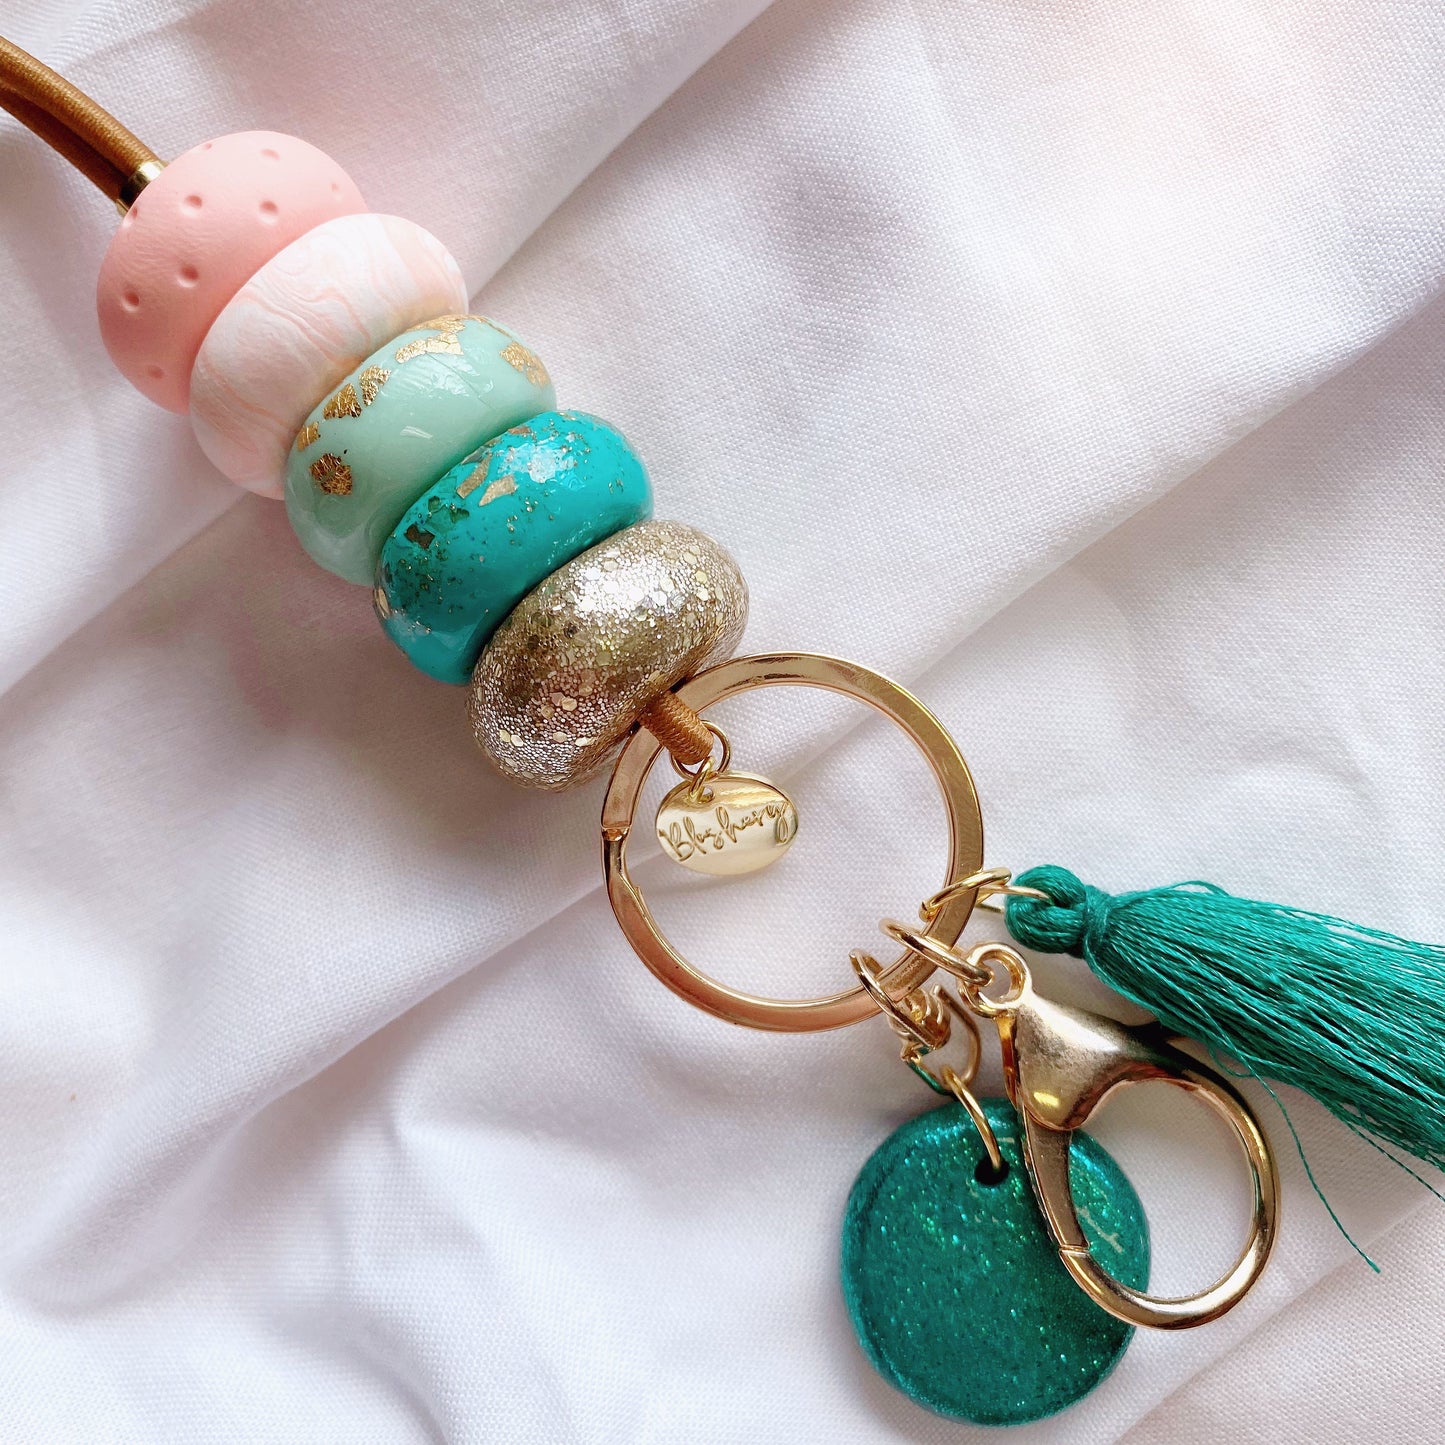 peach and teal lanyards have a gold plated clasp, a teal tassel and teal glitter charm